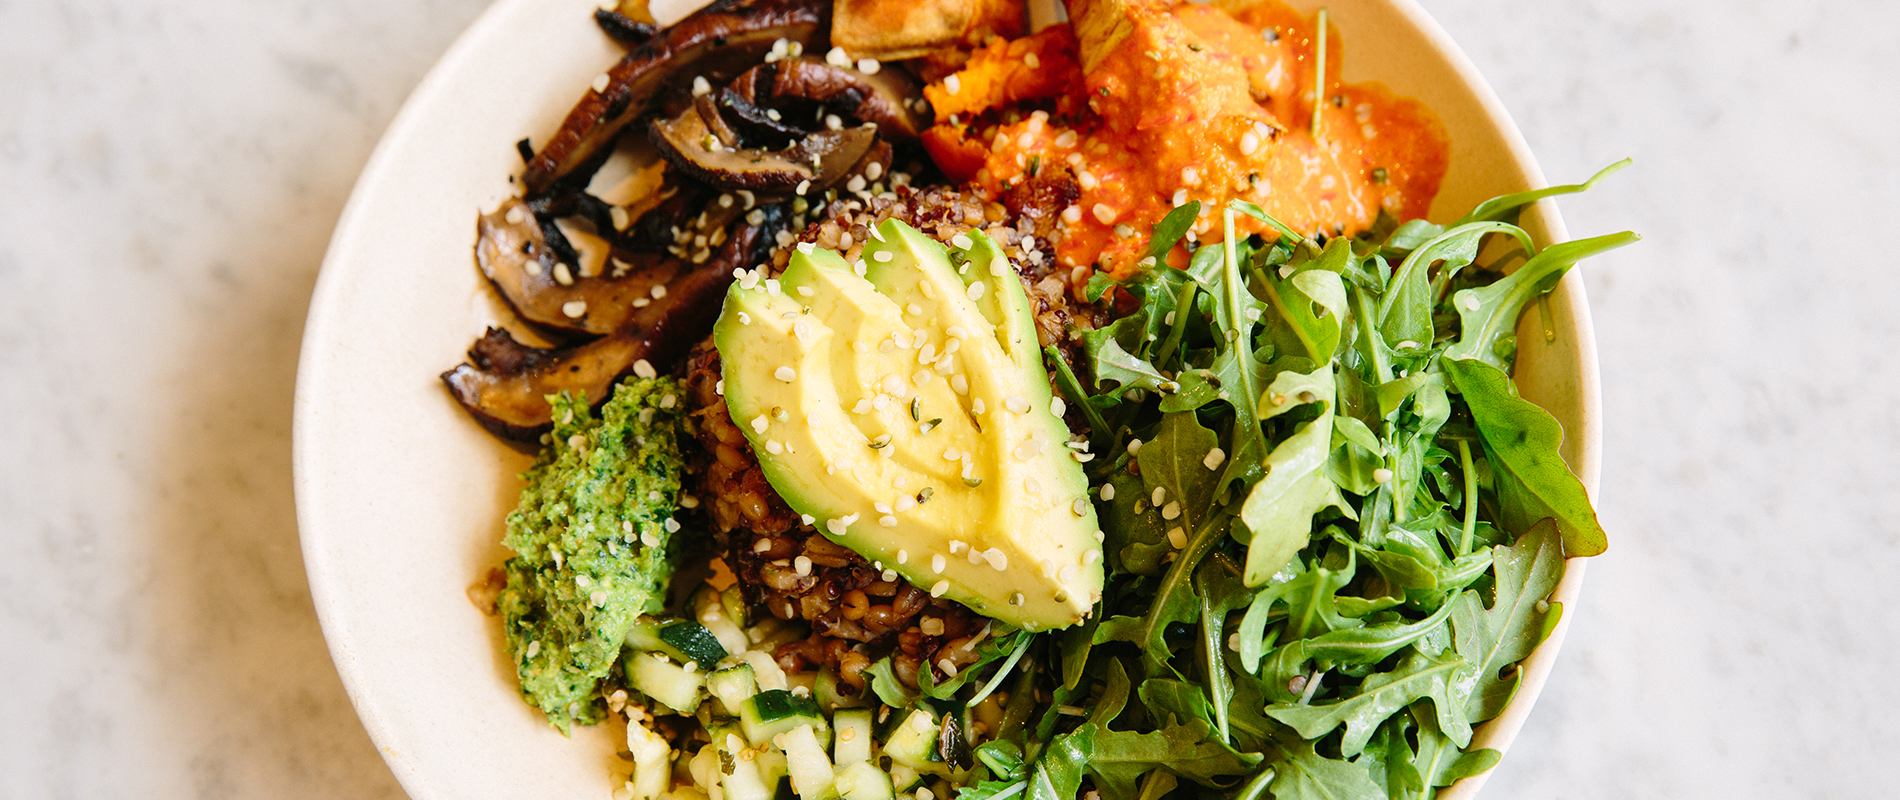 Healthy bowl of food from Flower Child in Santa Monica